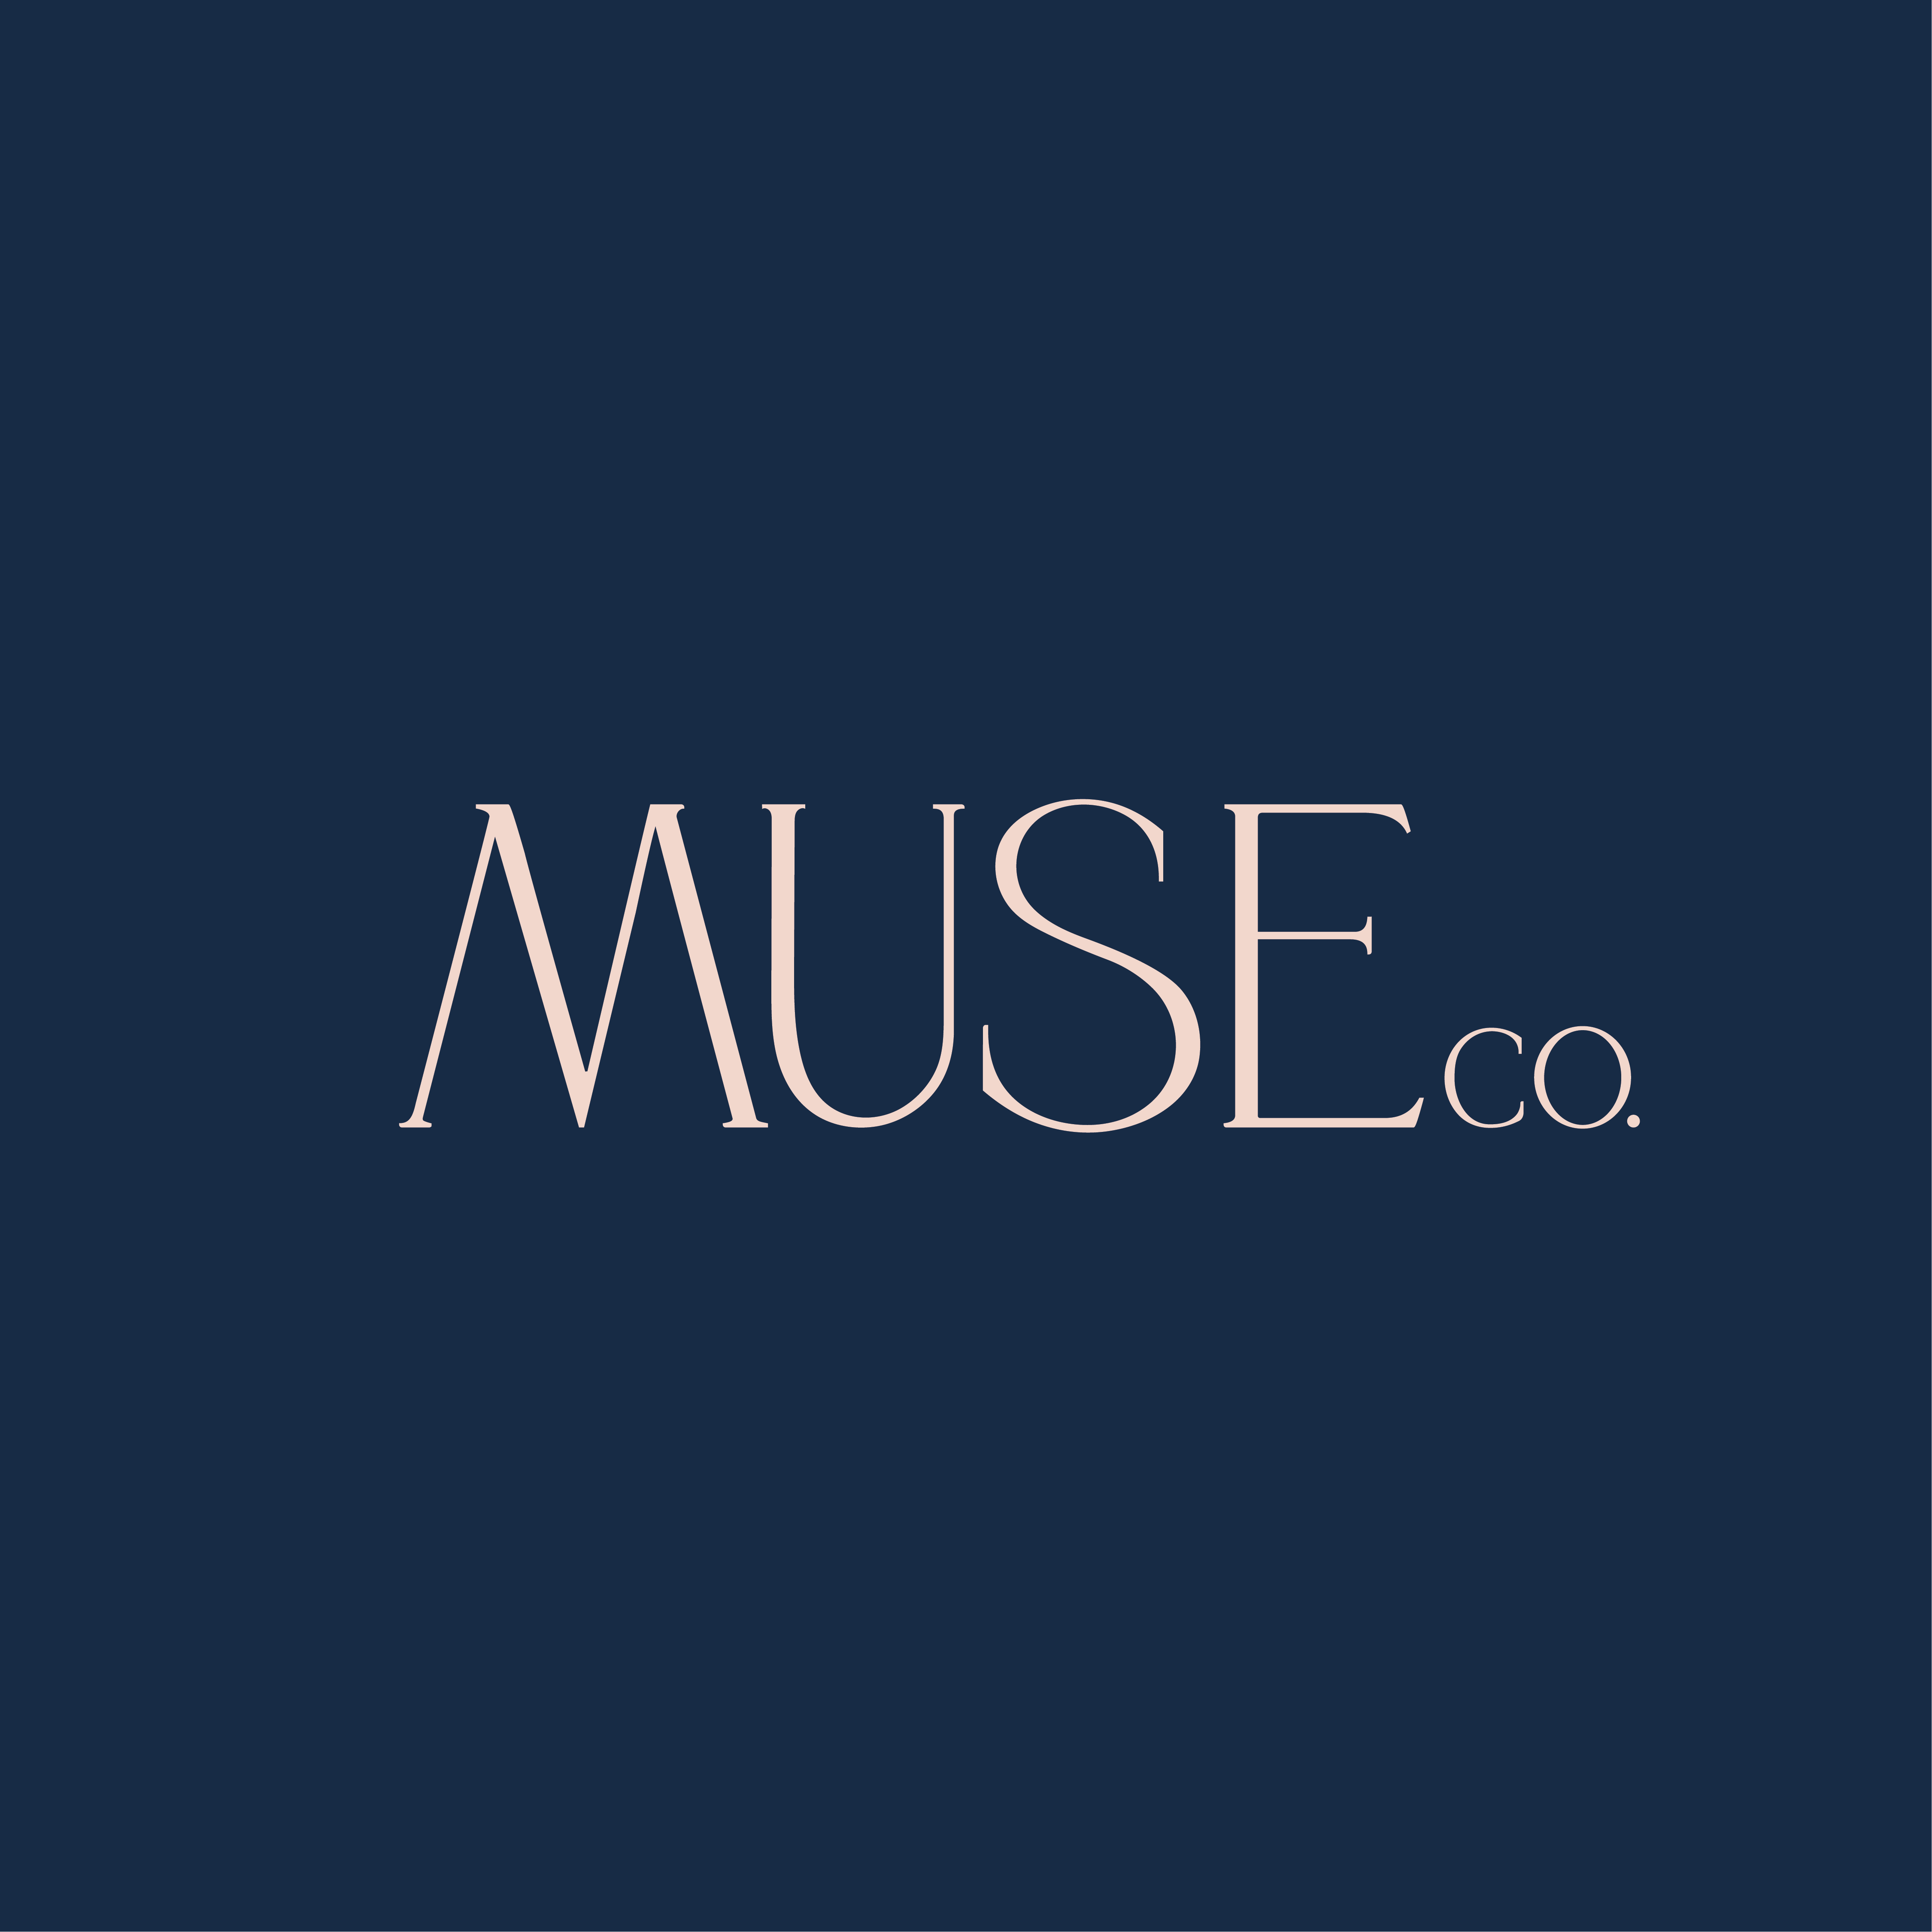 Muse Media Co.